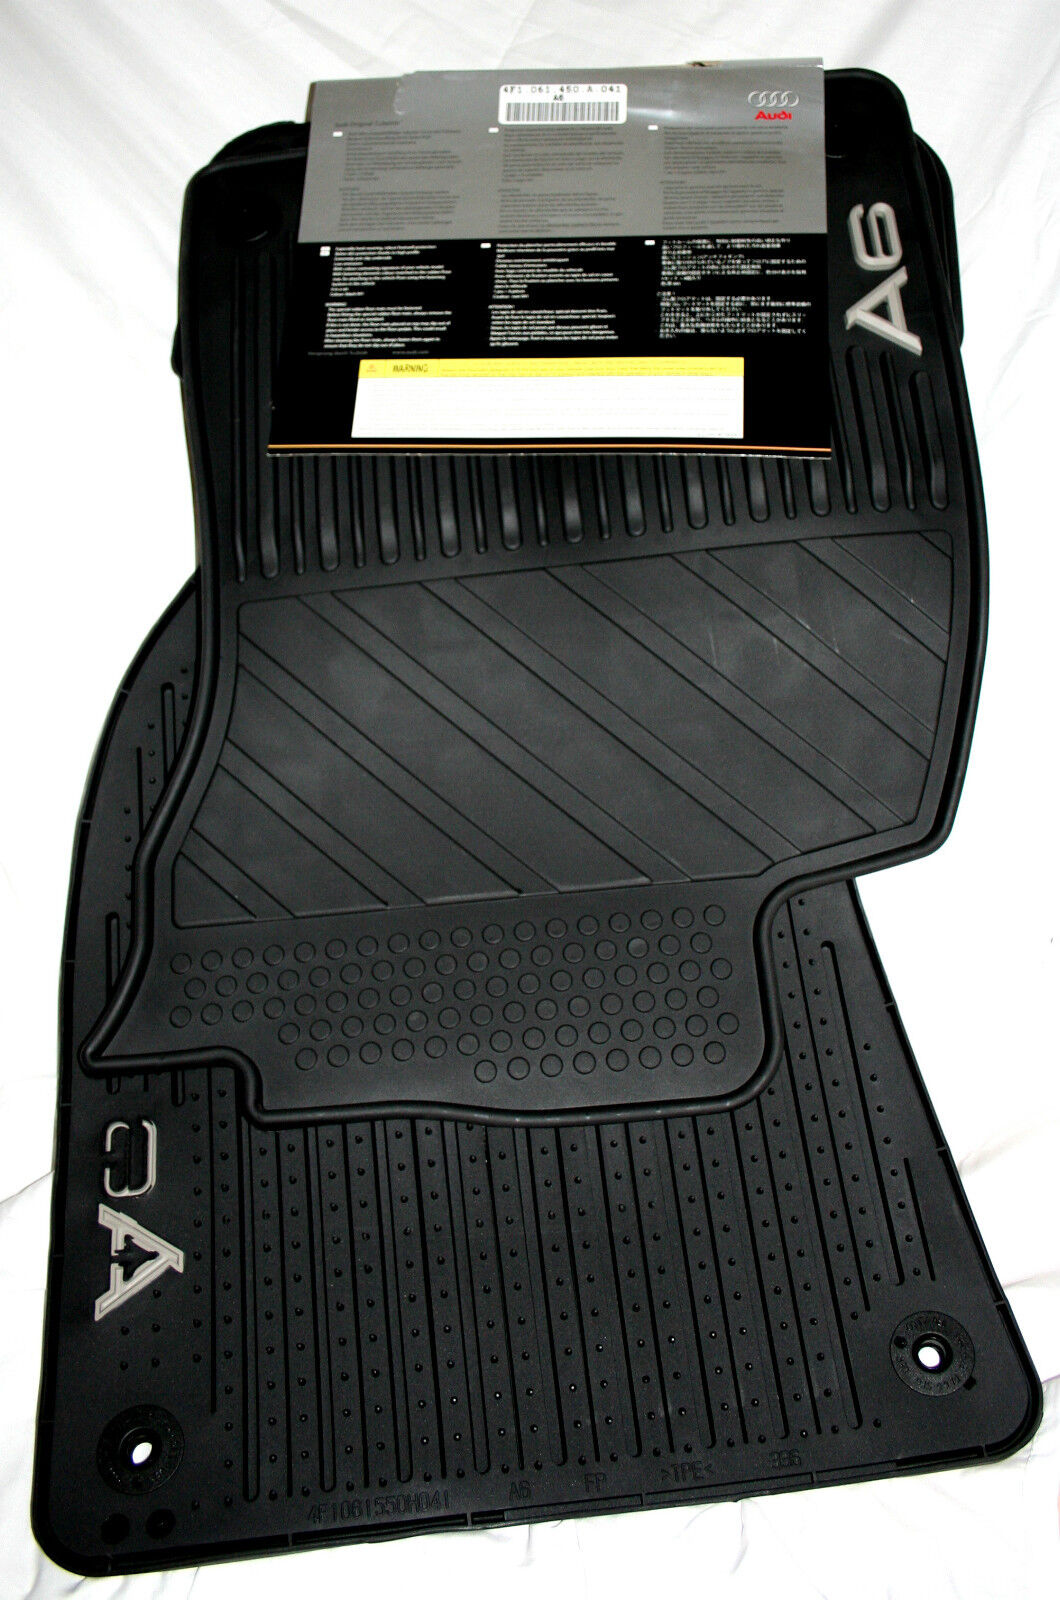 LATE 2006 to 2010 Audi A6 Rubber Floor Mats - Factory OEM Accessory -4 Piece Set